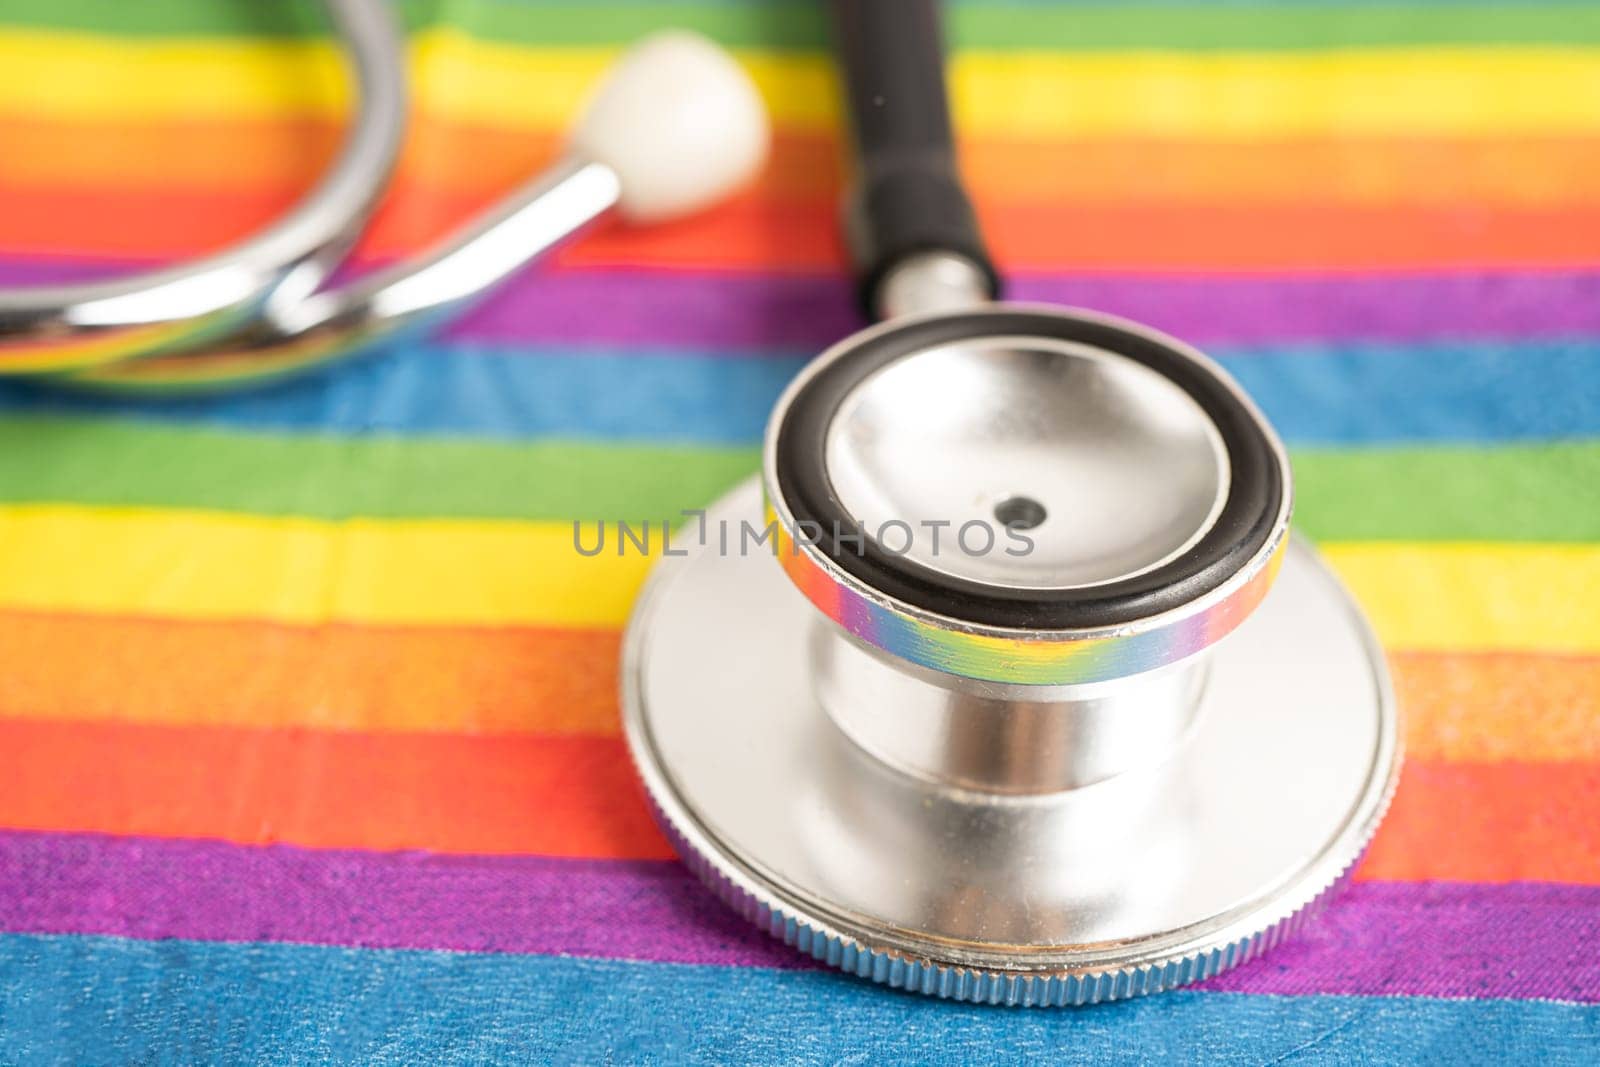 Black stethoscope on rainbow flag, symbol of LGBT pride month celebrate annual in June social, symbol of gay, lesbian, bisexual, transgender, human rights and peace.